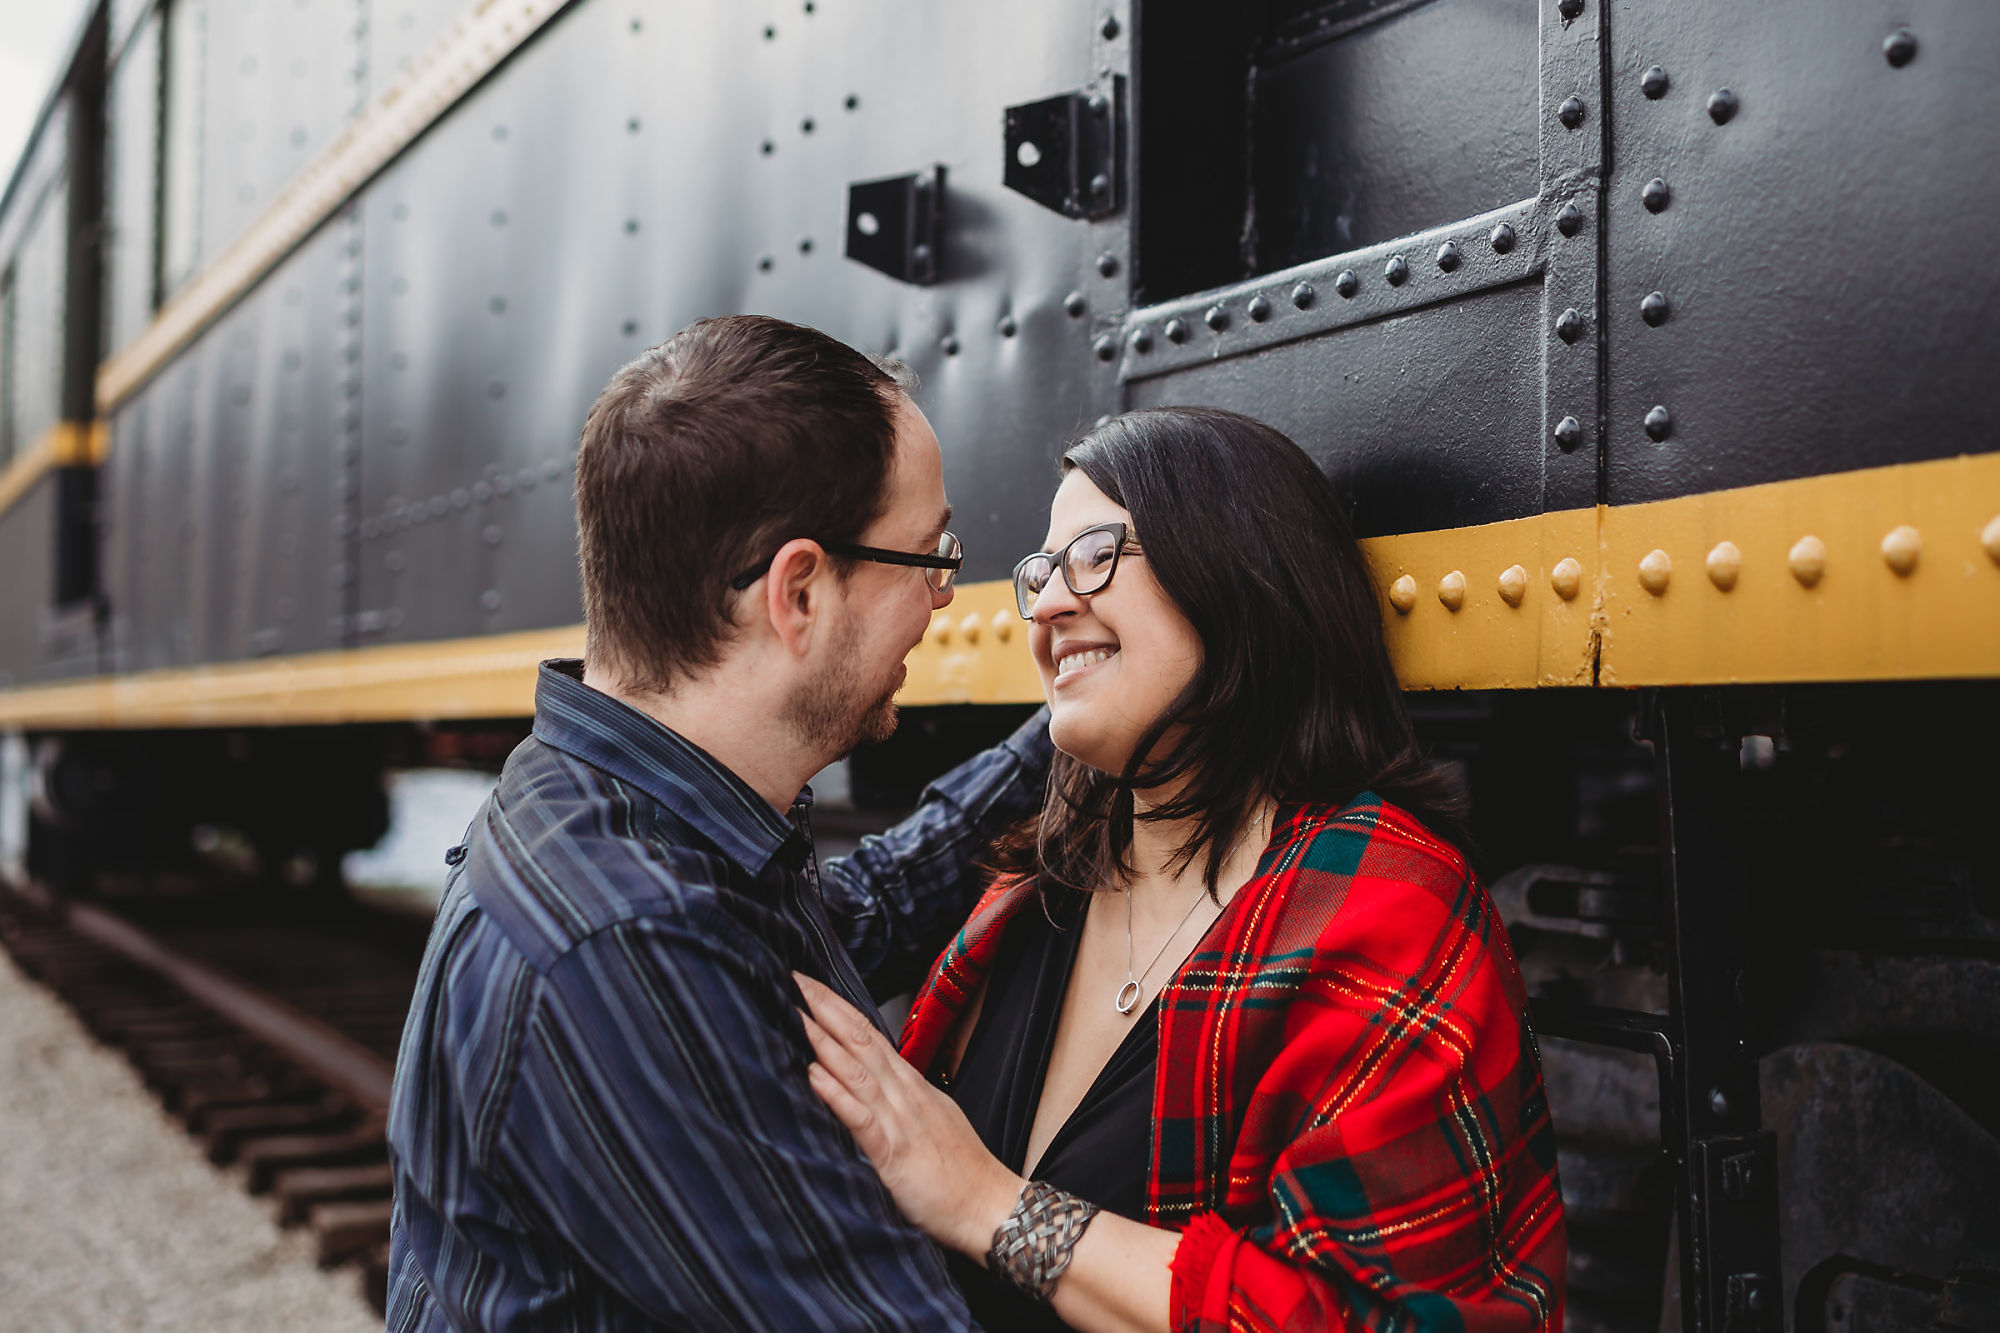 Andy & Erin embrace in front of a museum train at Dundas Conservation Area in Hamilton Ontario during their maternity photoshoot with Dundas Maternity Photographer Jennifer Blaak.